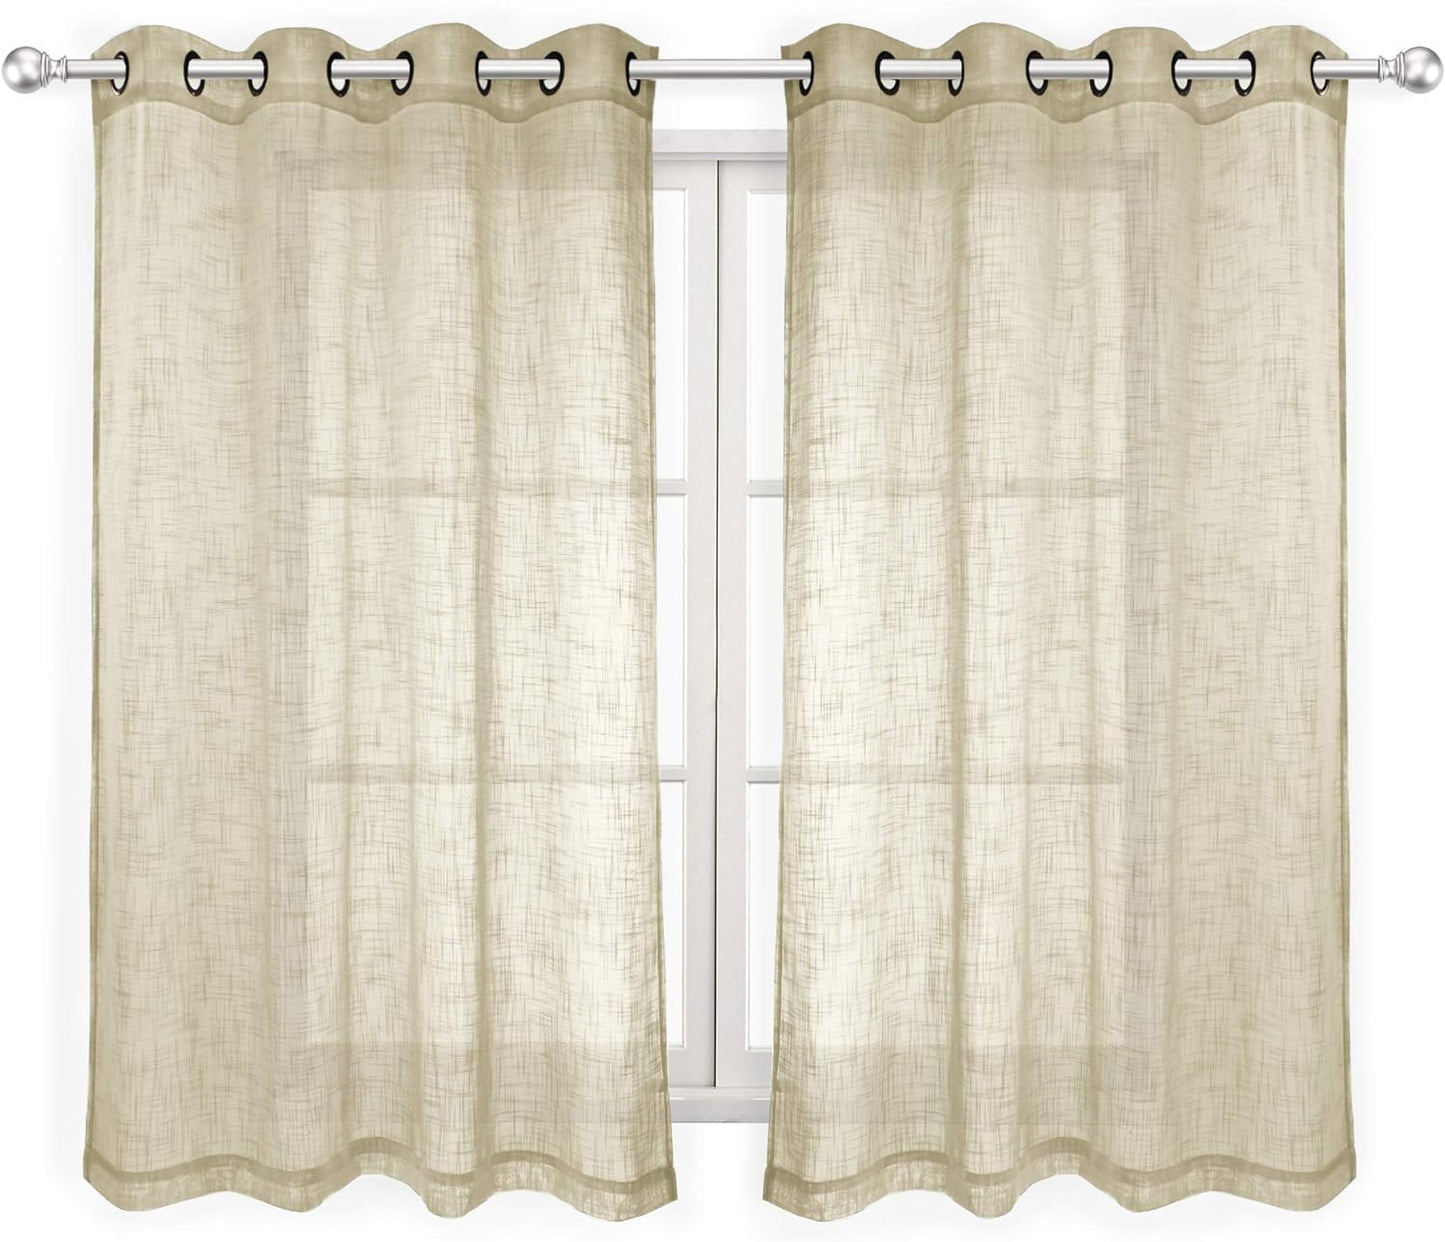 VOILYBIRD Palma Light Filtering Drapes Natural Linen Blended Semi Sheer Curtains 84 Inches Long Bronze Grommet for Bedroom (Natural, 52" W X 84" L, 2 Panels)  VOILYBIRD Beige 52"W X 63"L 